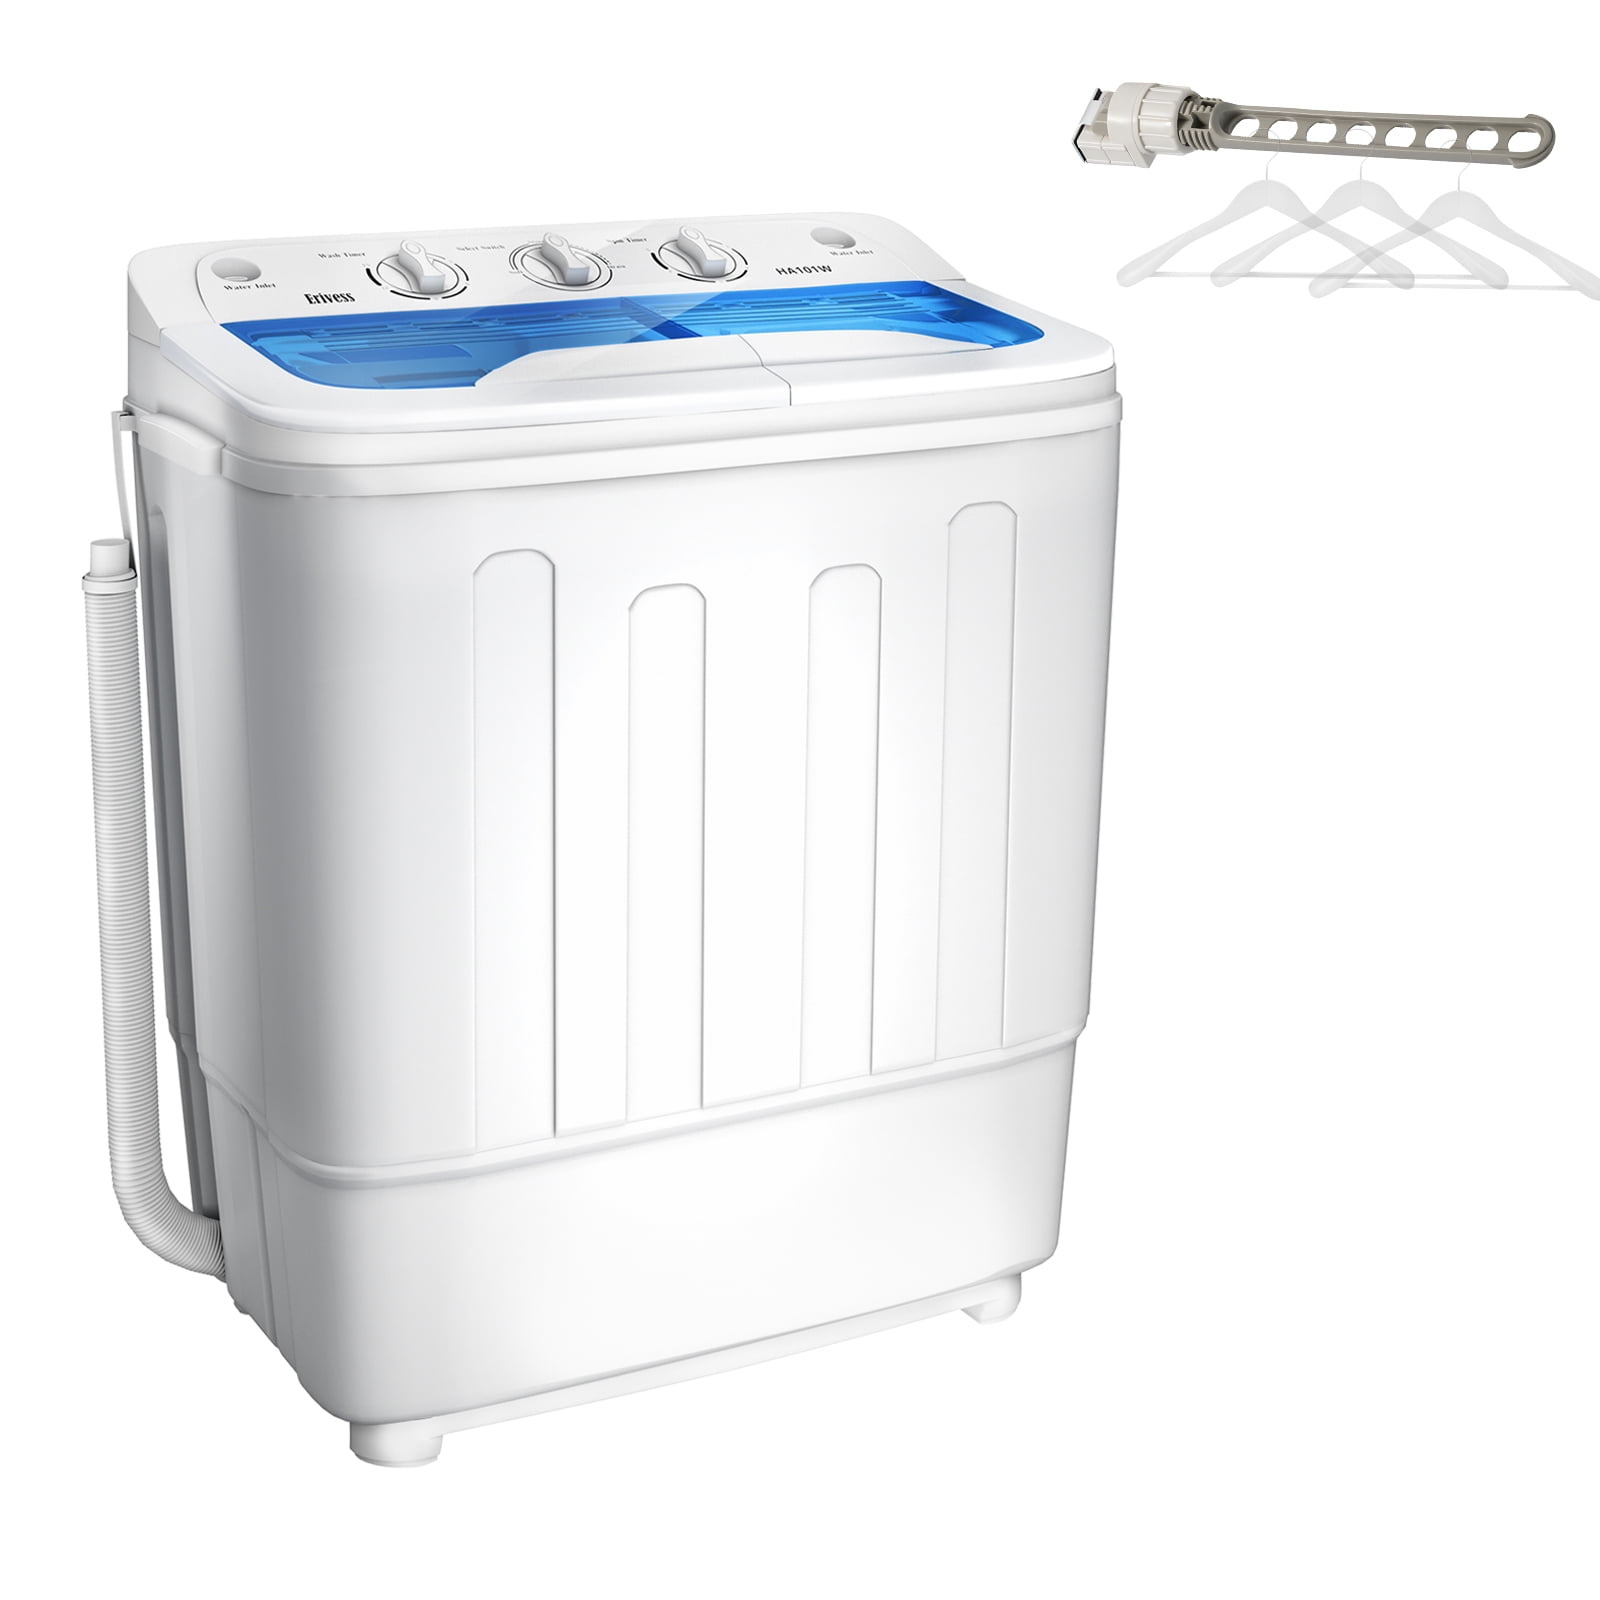  COMFEE' Washing Machine, 1.8 Cu.ft LED Portable Washing Machine  and Compact Washer, Hygiene+ Deep Clean, Environmentally Friendly, Child  Lock for RV, Dorm, Apartment, Ivory White : Everything Else